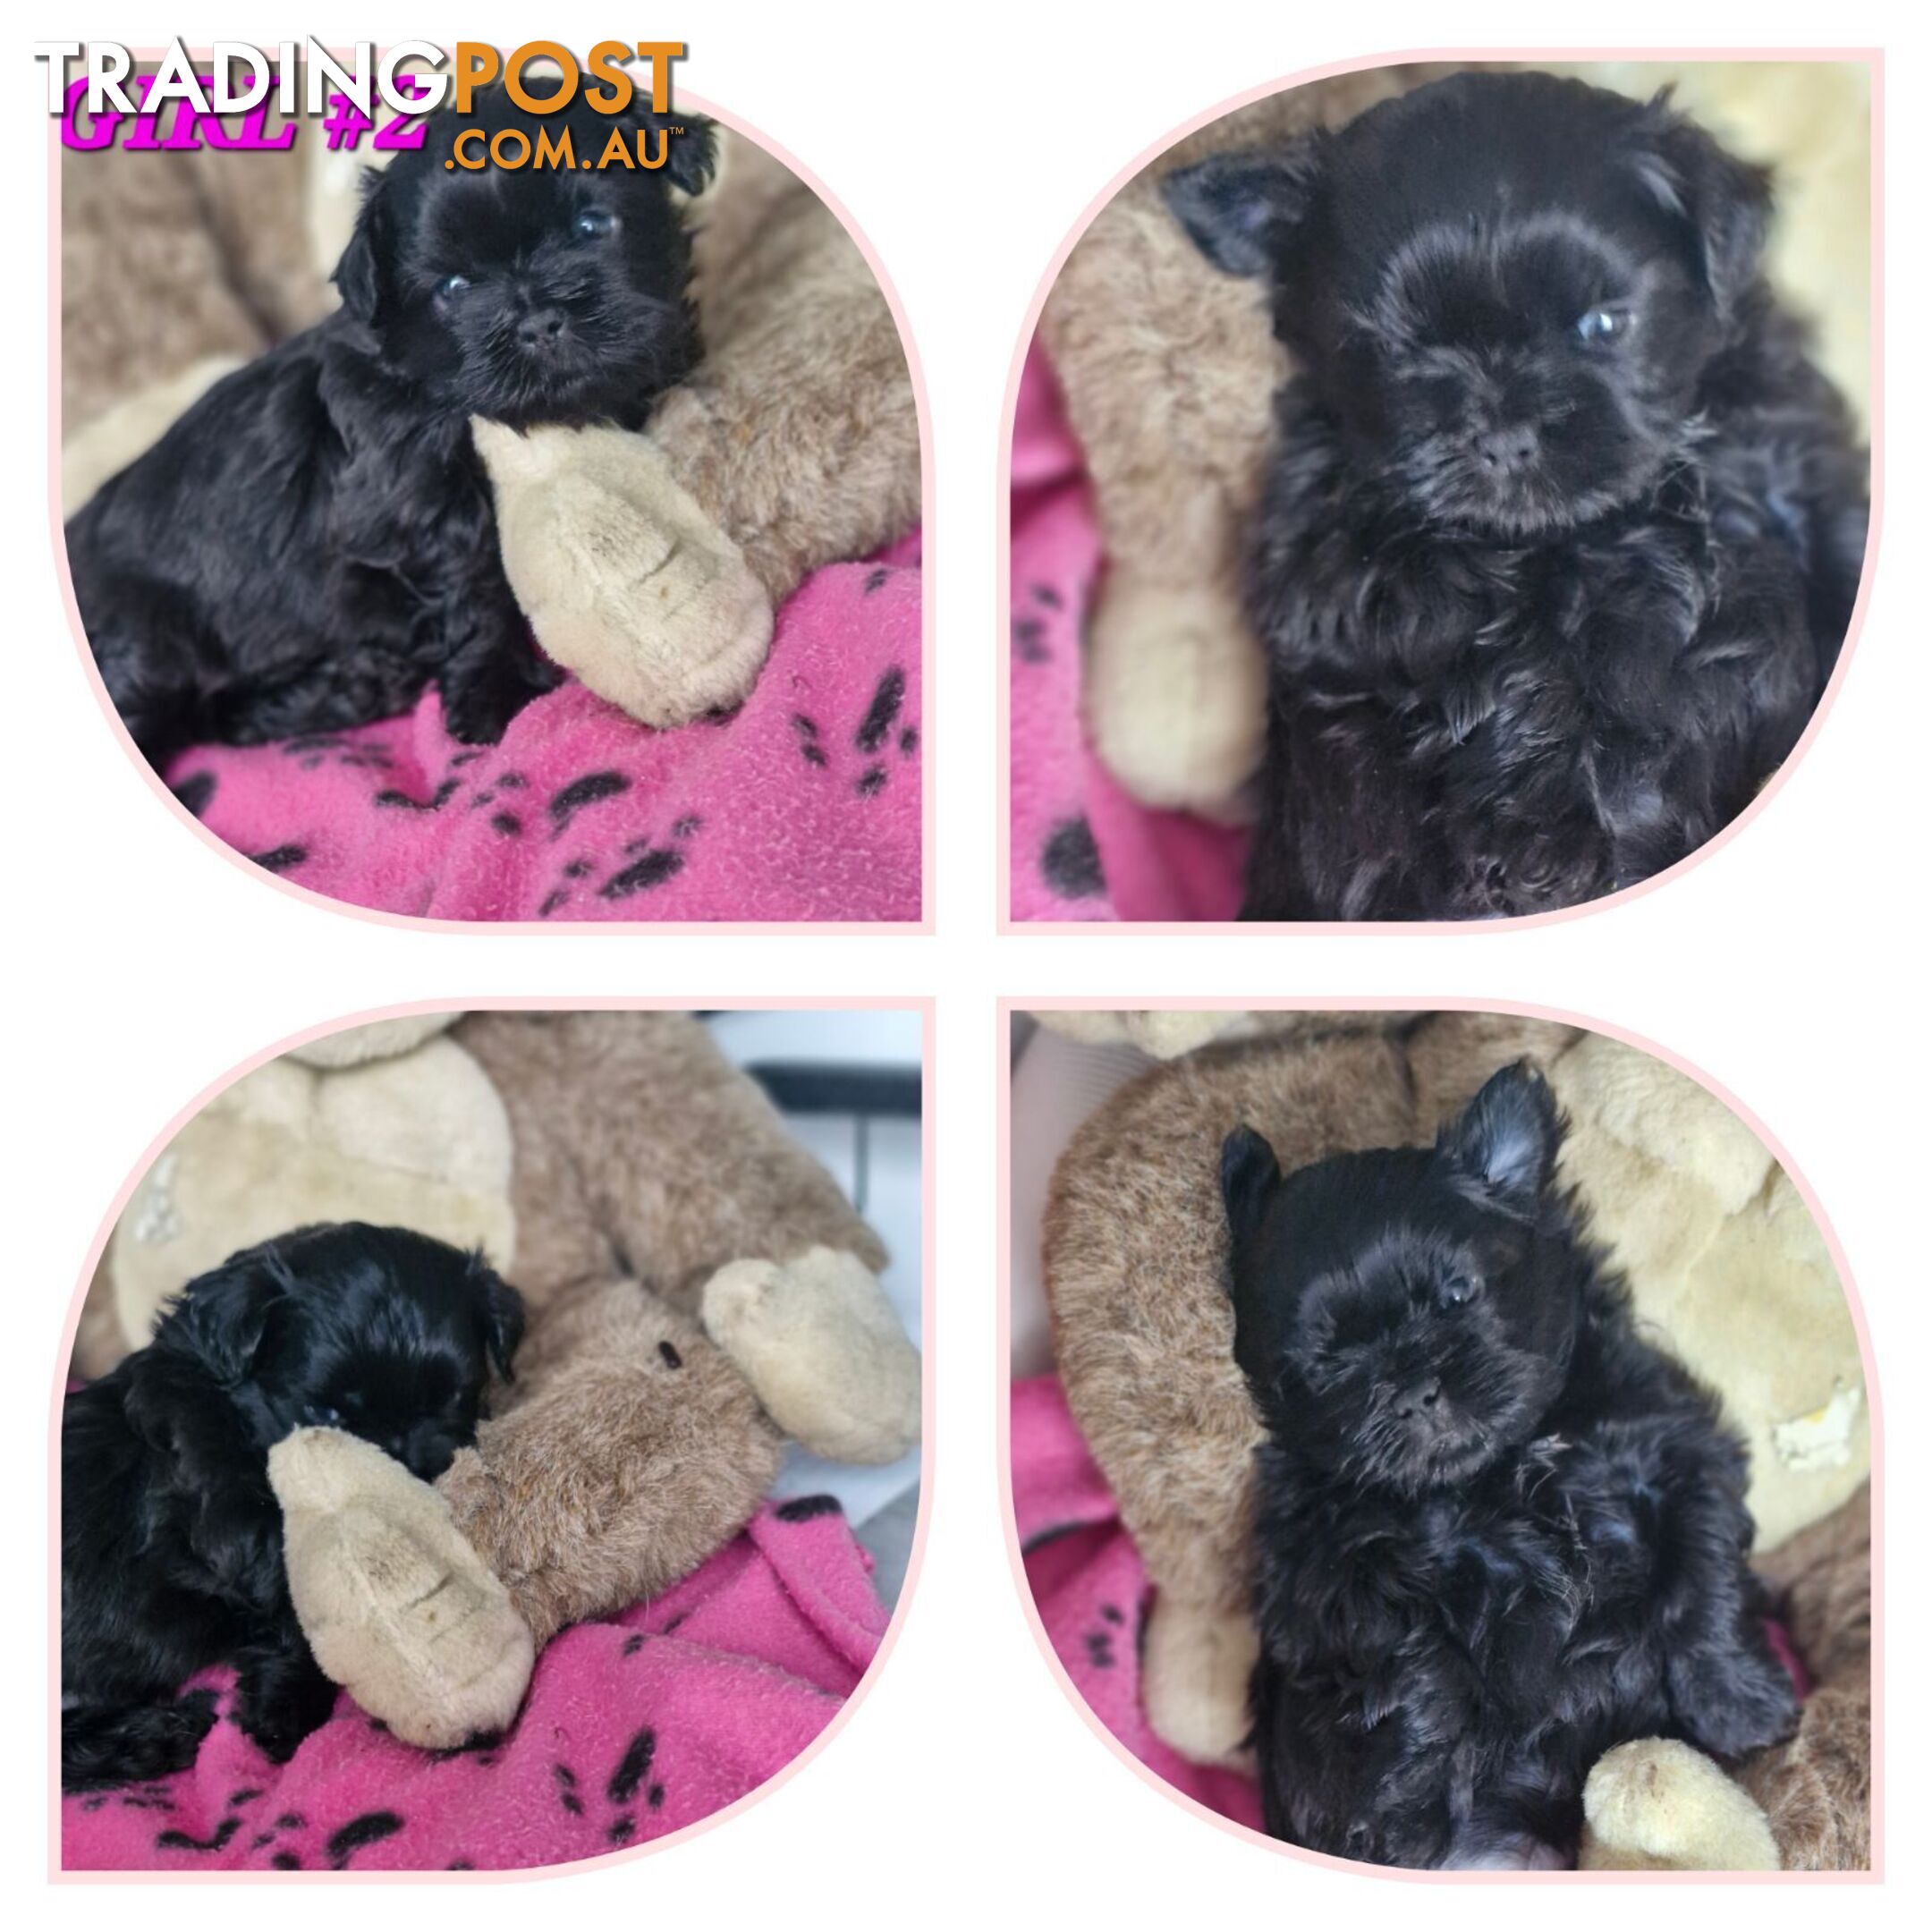 ABSOLUTELY ADORABLE CHOCOLATE LIVER & BLACK  PUREBRED SHIHTZU PUPPIES COMING SOON!!!